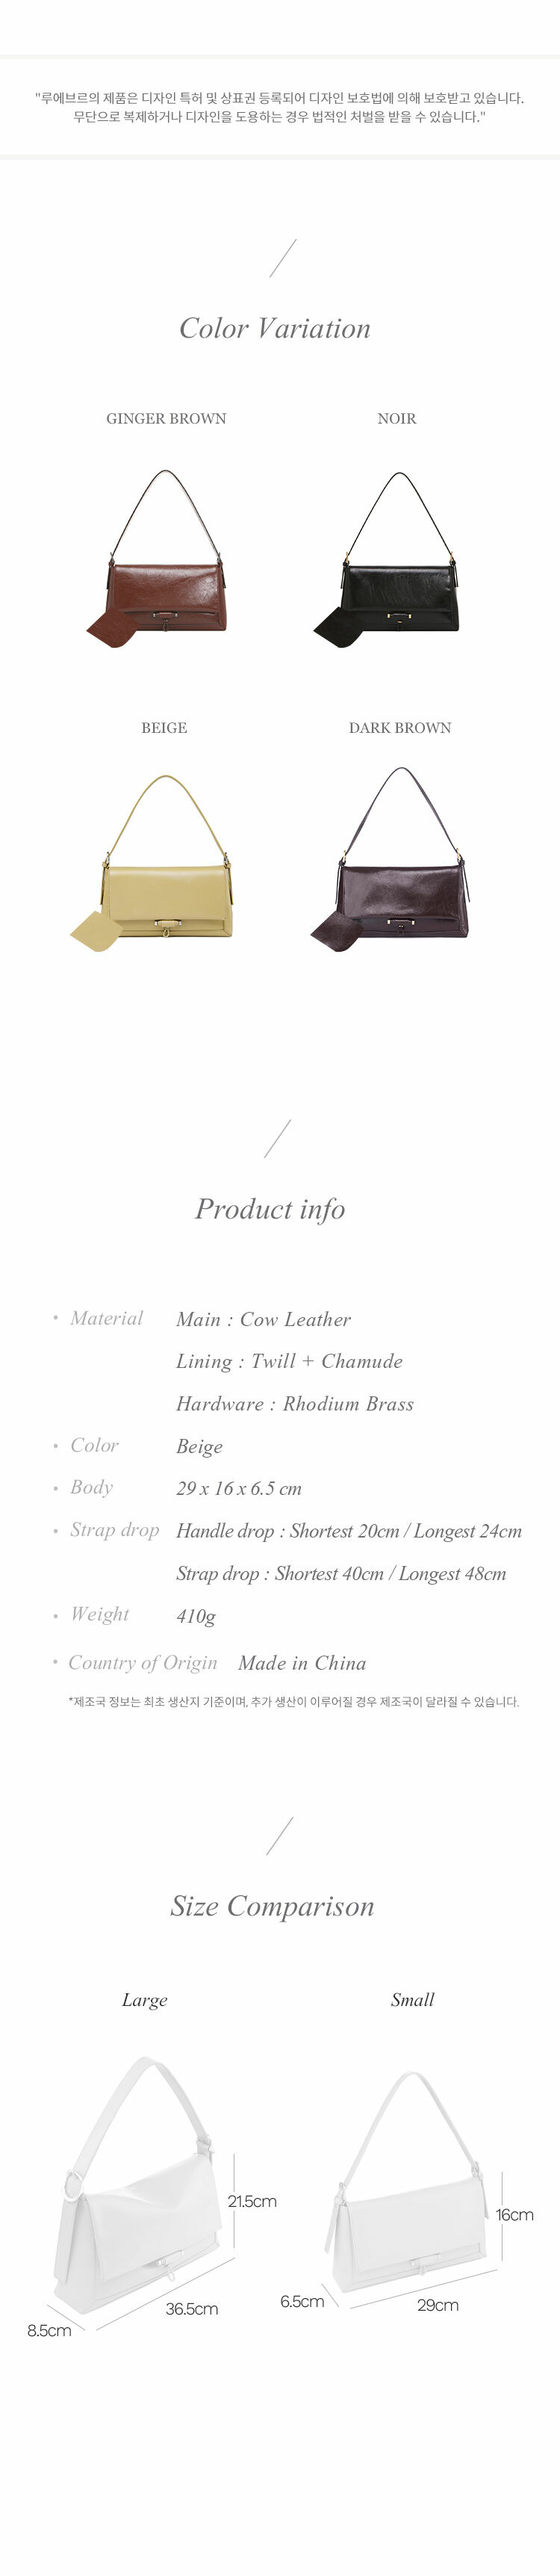 product_info